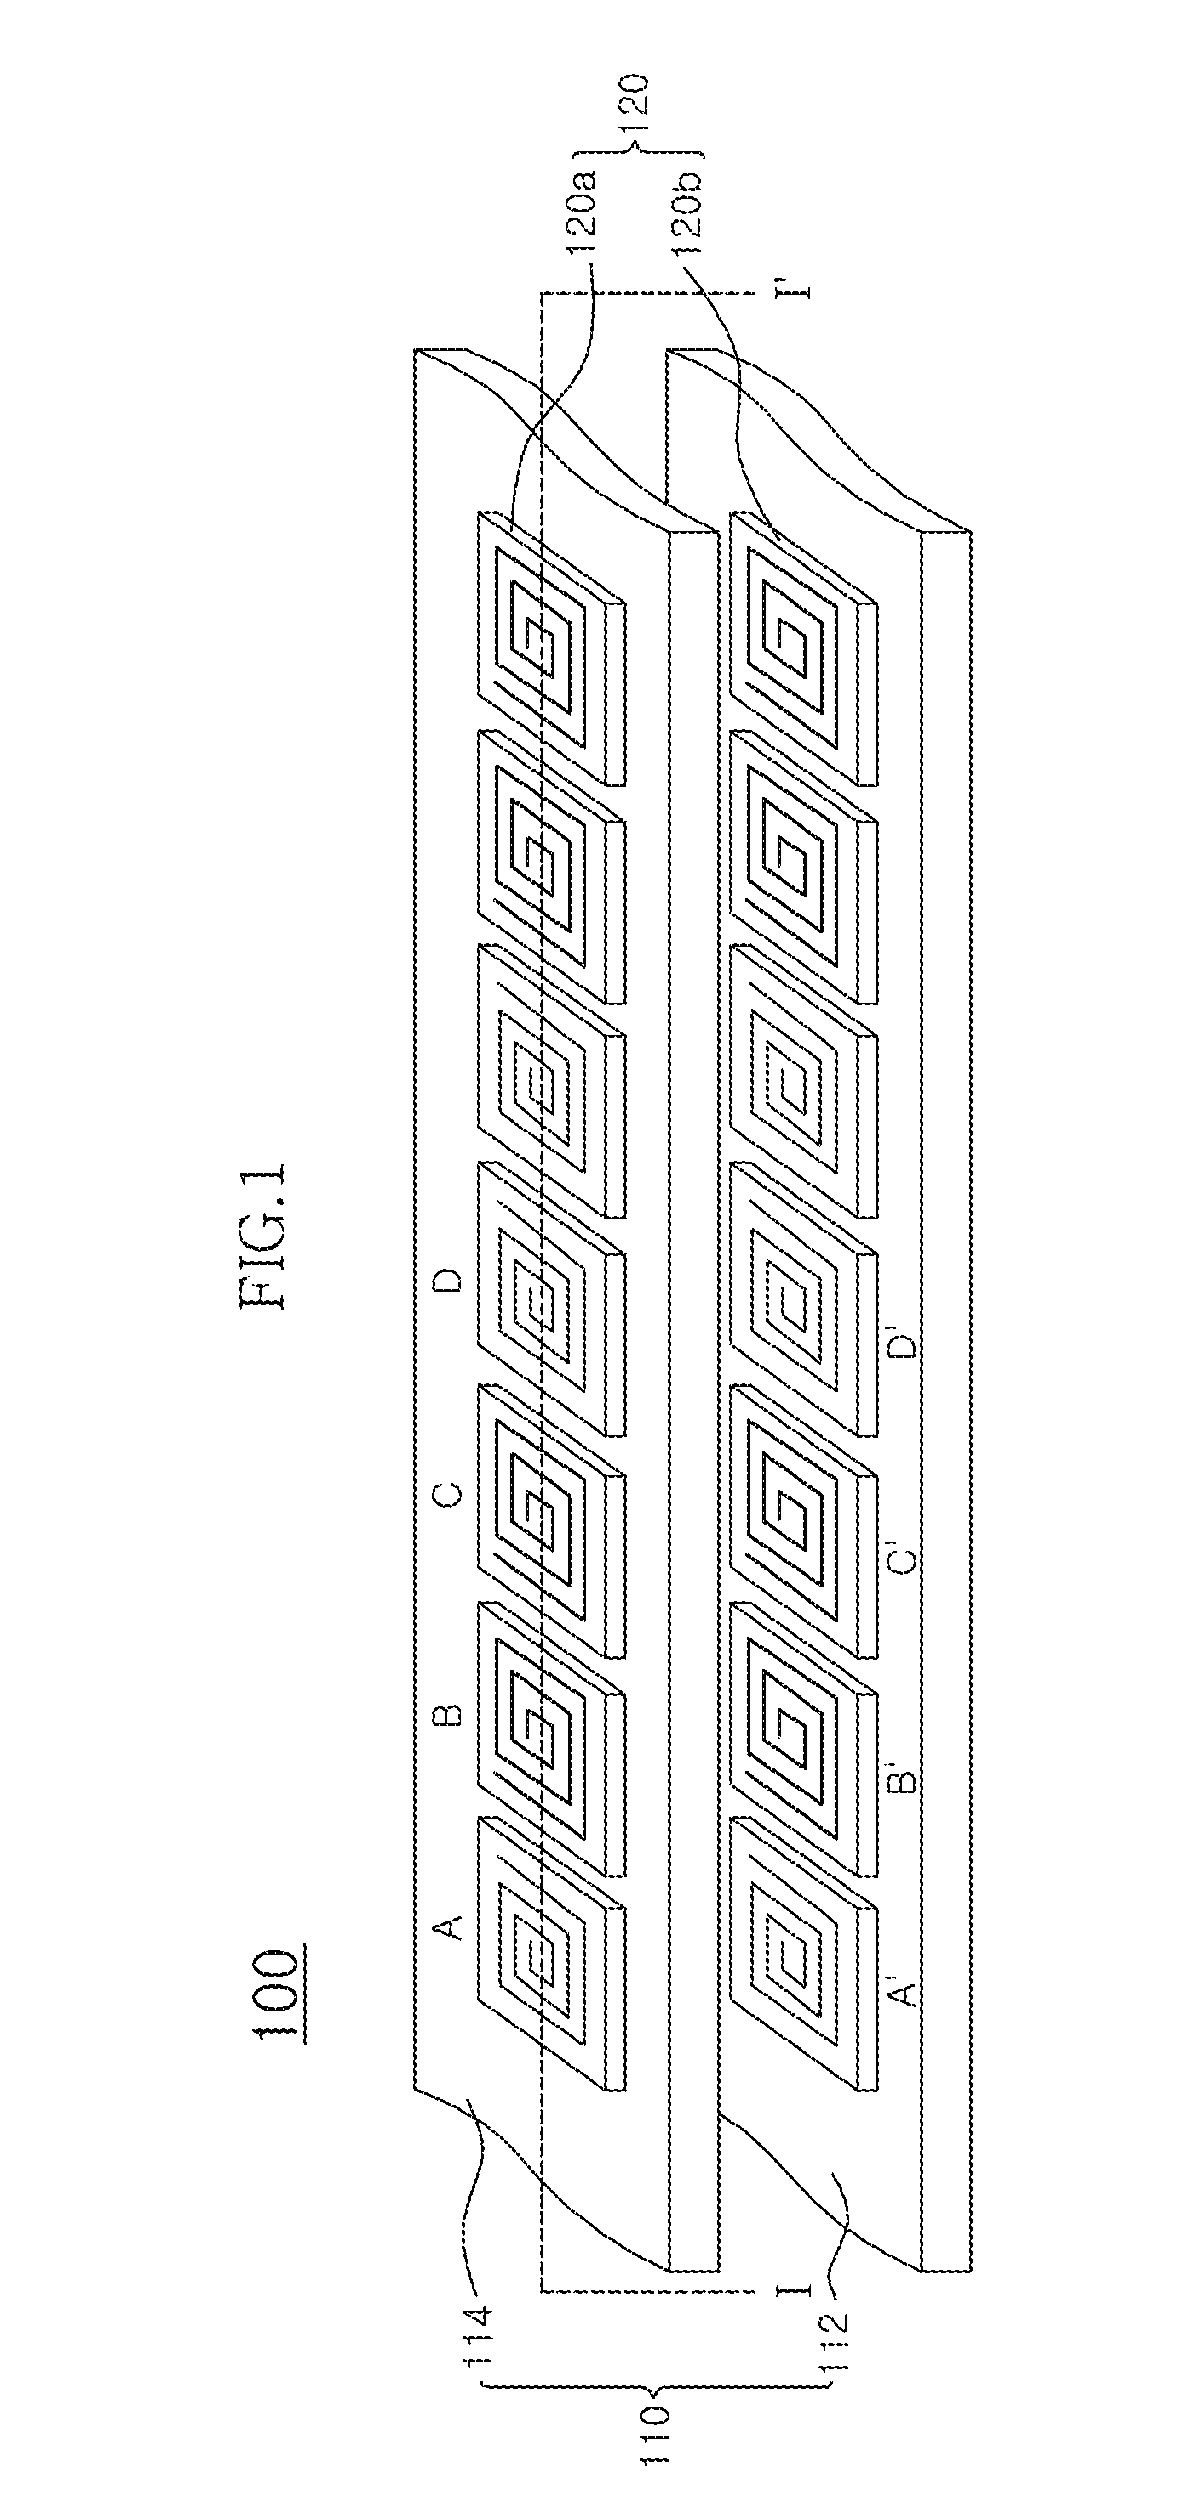 Multi-chip package with improved signal transmission